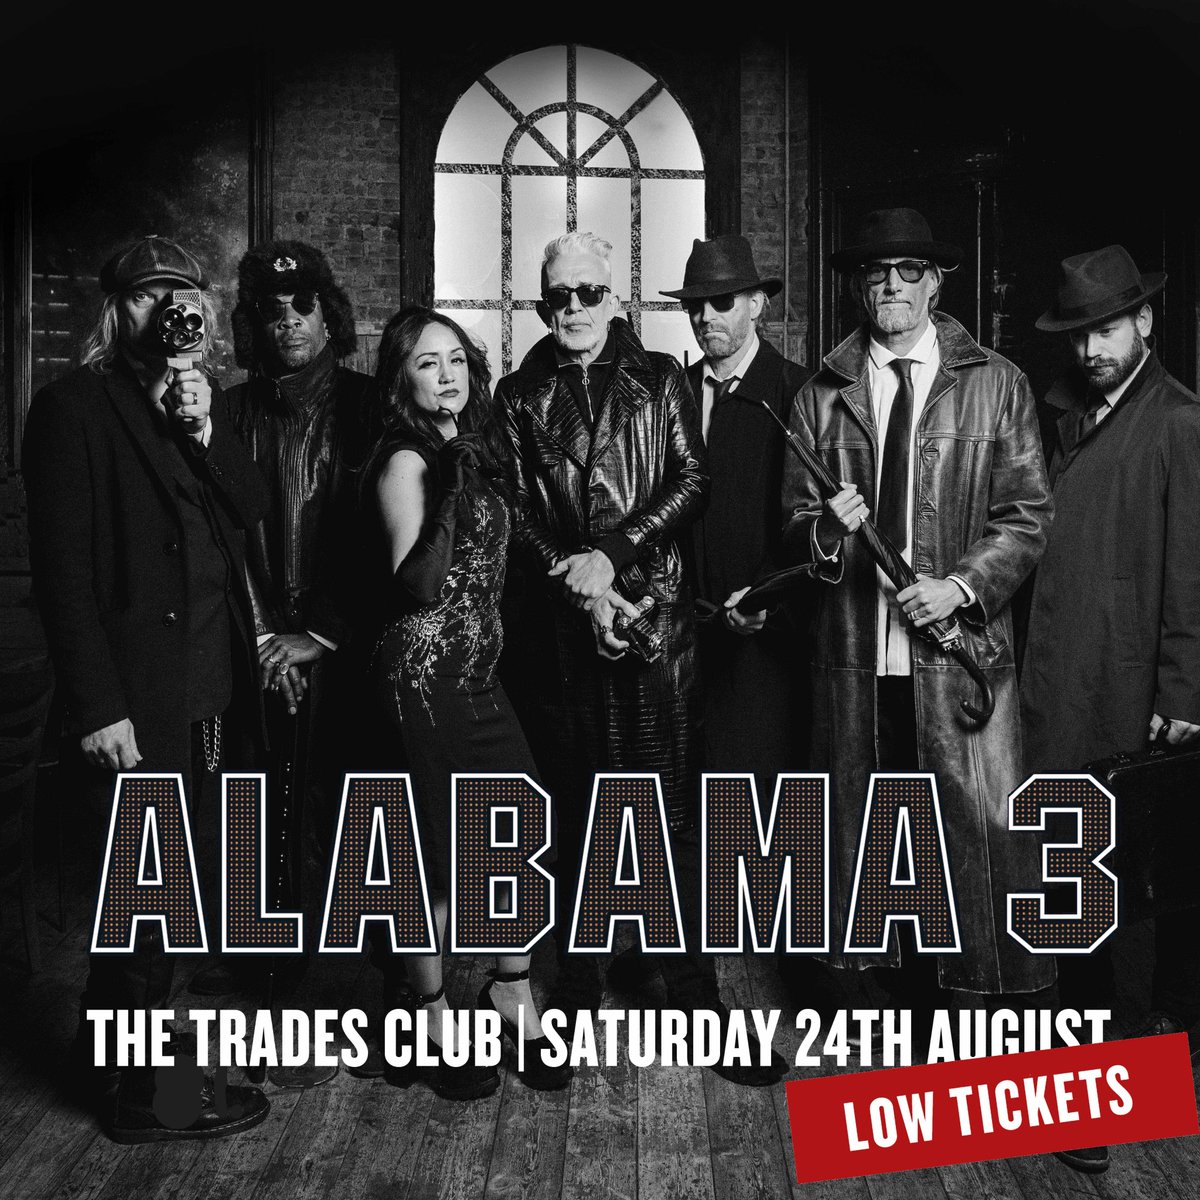 Attention: Just TEN tickets left for our @TheAlabama3 show. Get them HERE >> thetradesclub.com/events/alabama3